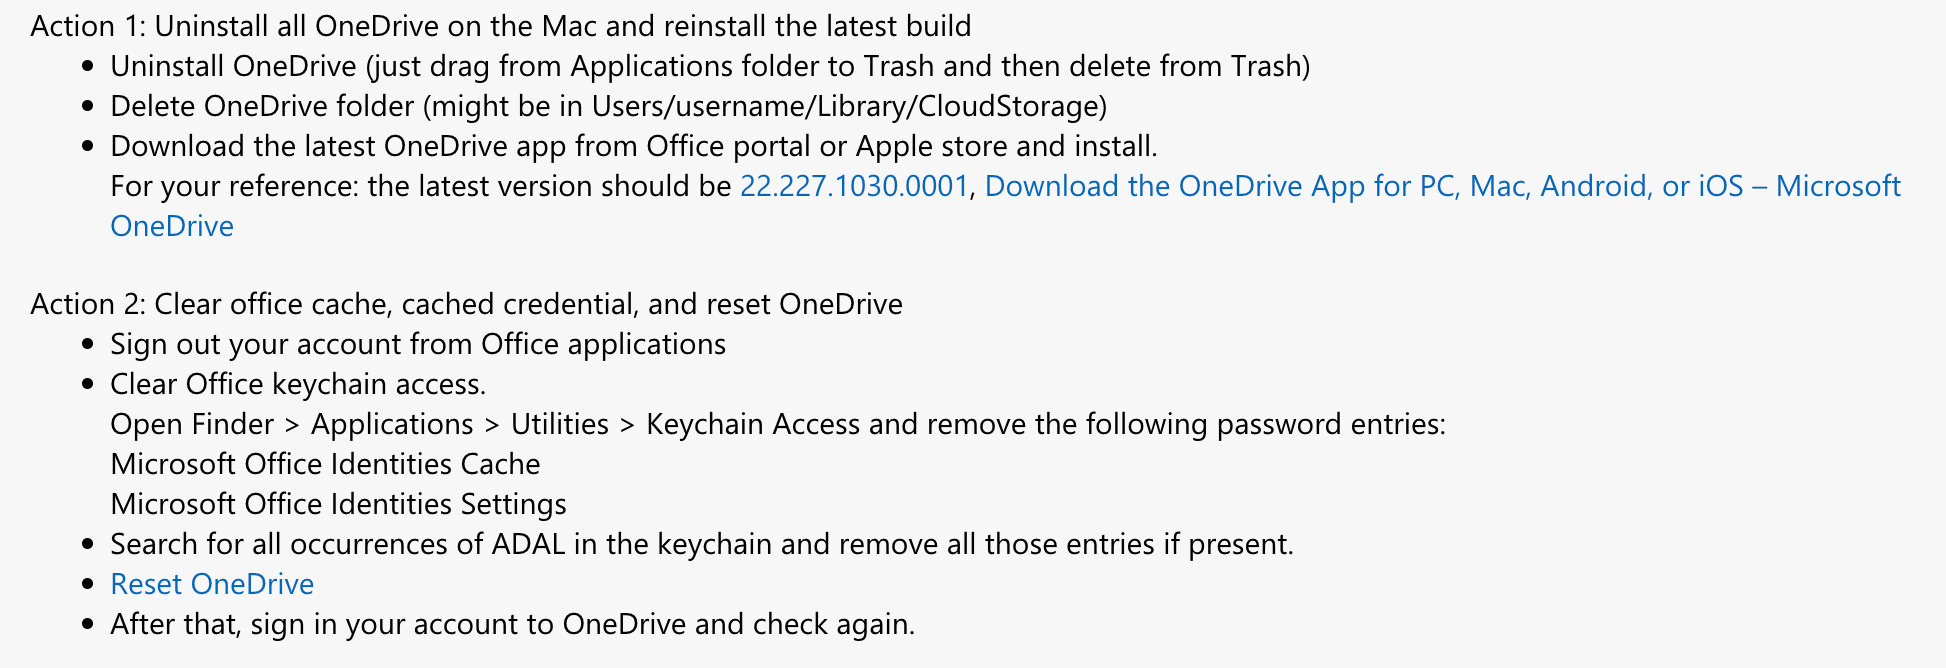 How to Uninstall OneDrive on Mac - Removal Guide